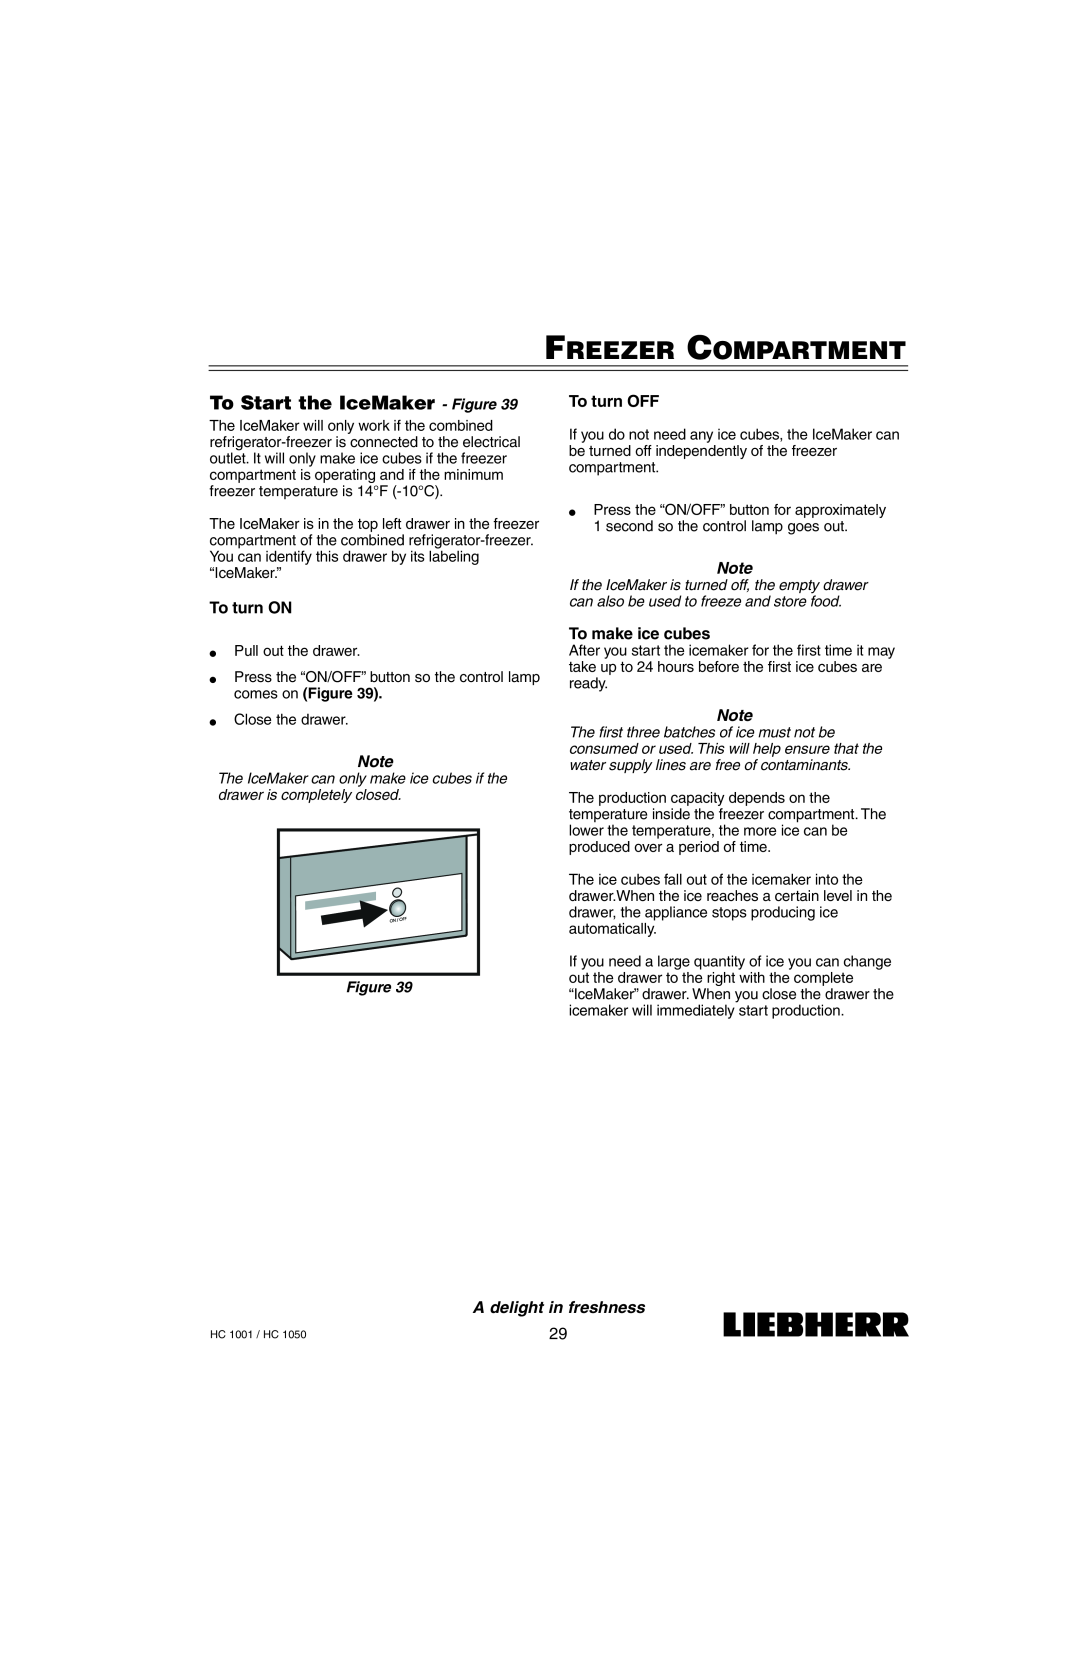 Liebherr HC1050, HC1001 To Start the IceMaker - Figure, To turn ON, To turn OFF, To make ice cubes, Freezer Compartment 